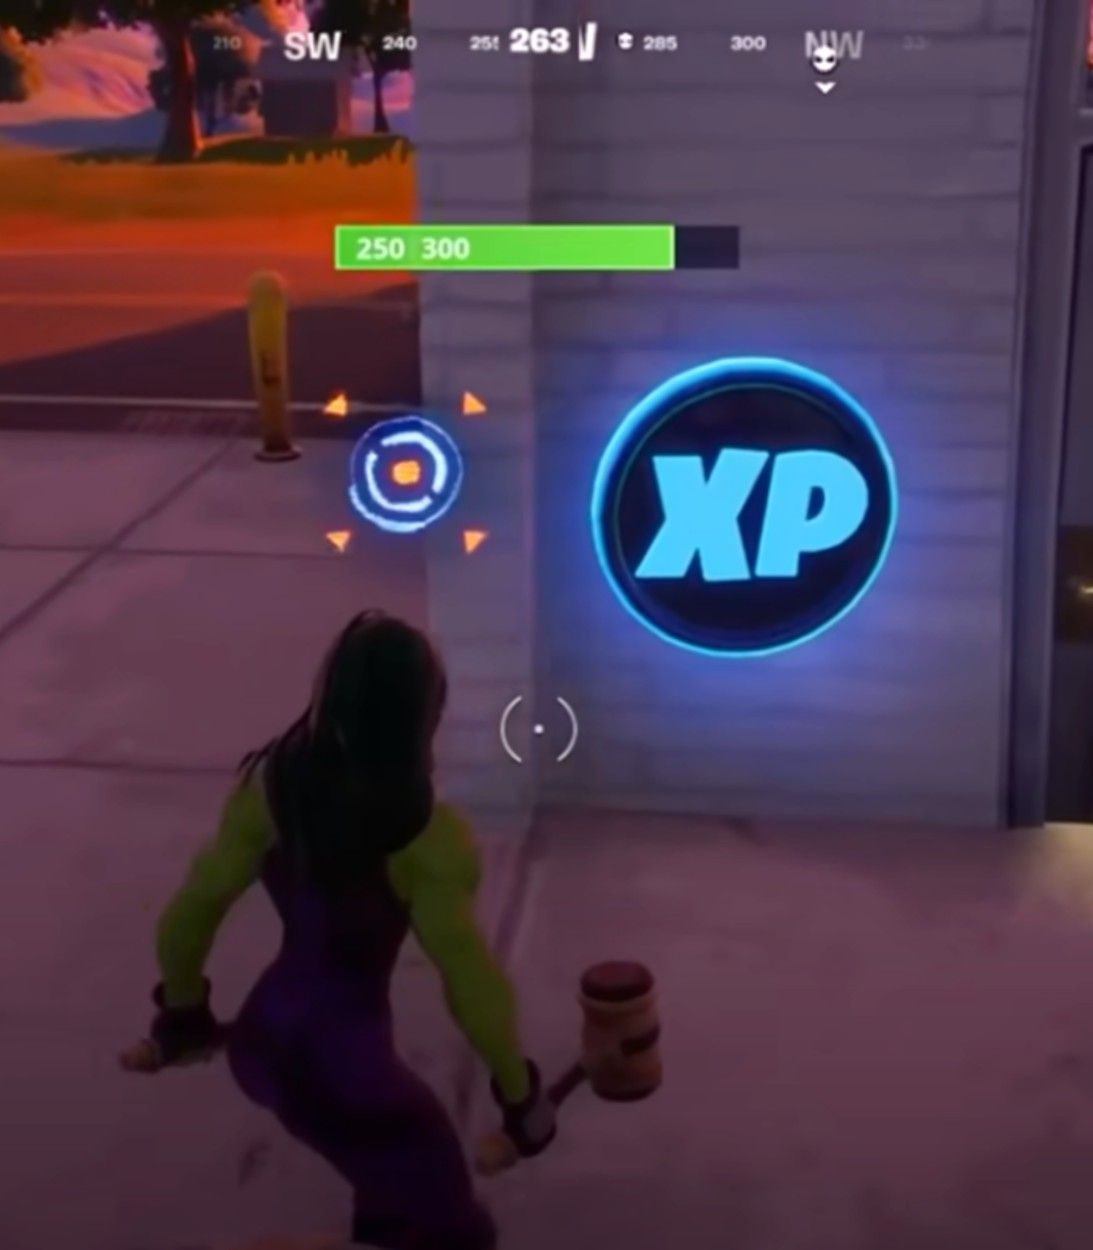 A player wears the She-Hulk skin and finds the Blue XP Coin behind the metal box near the green steel bridge in Fortnite Season 4